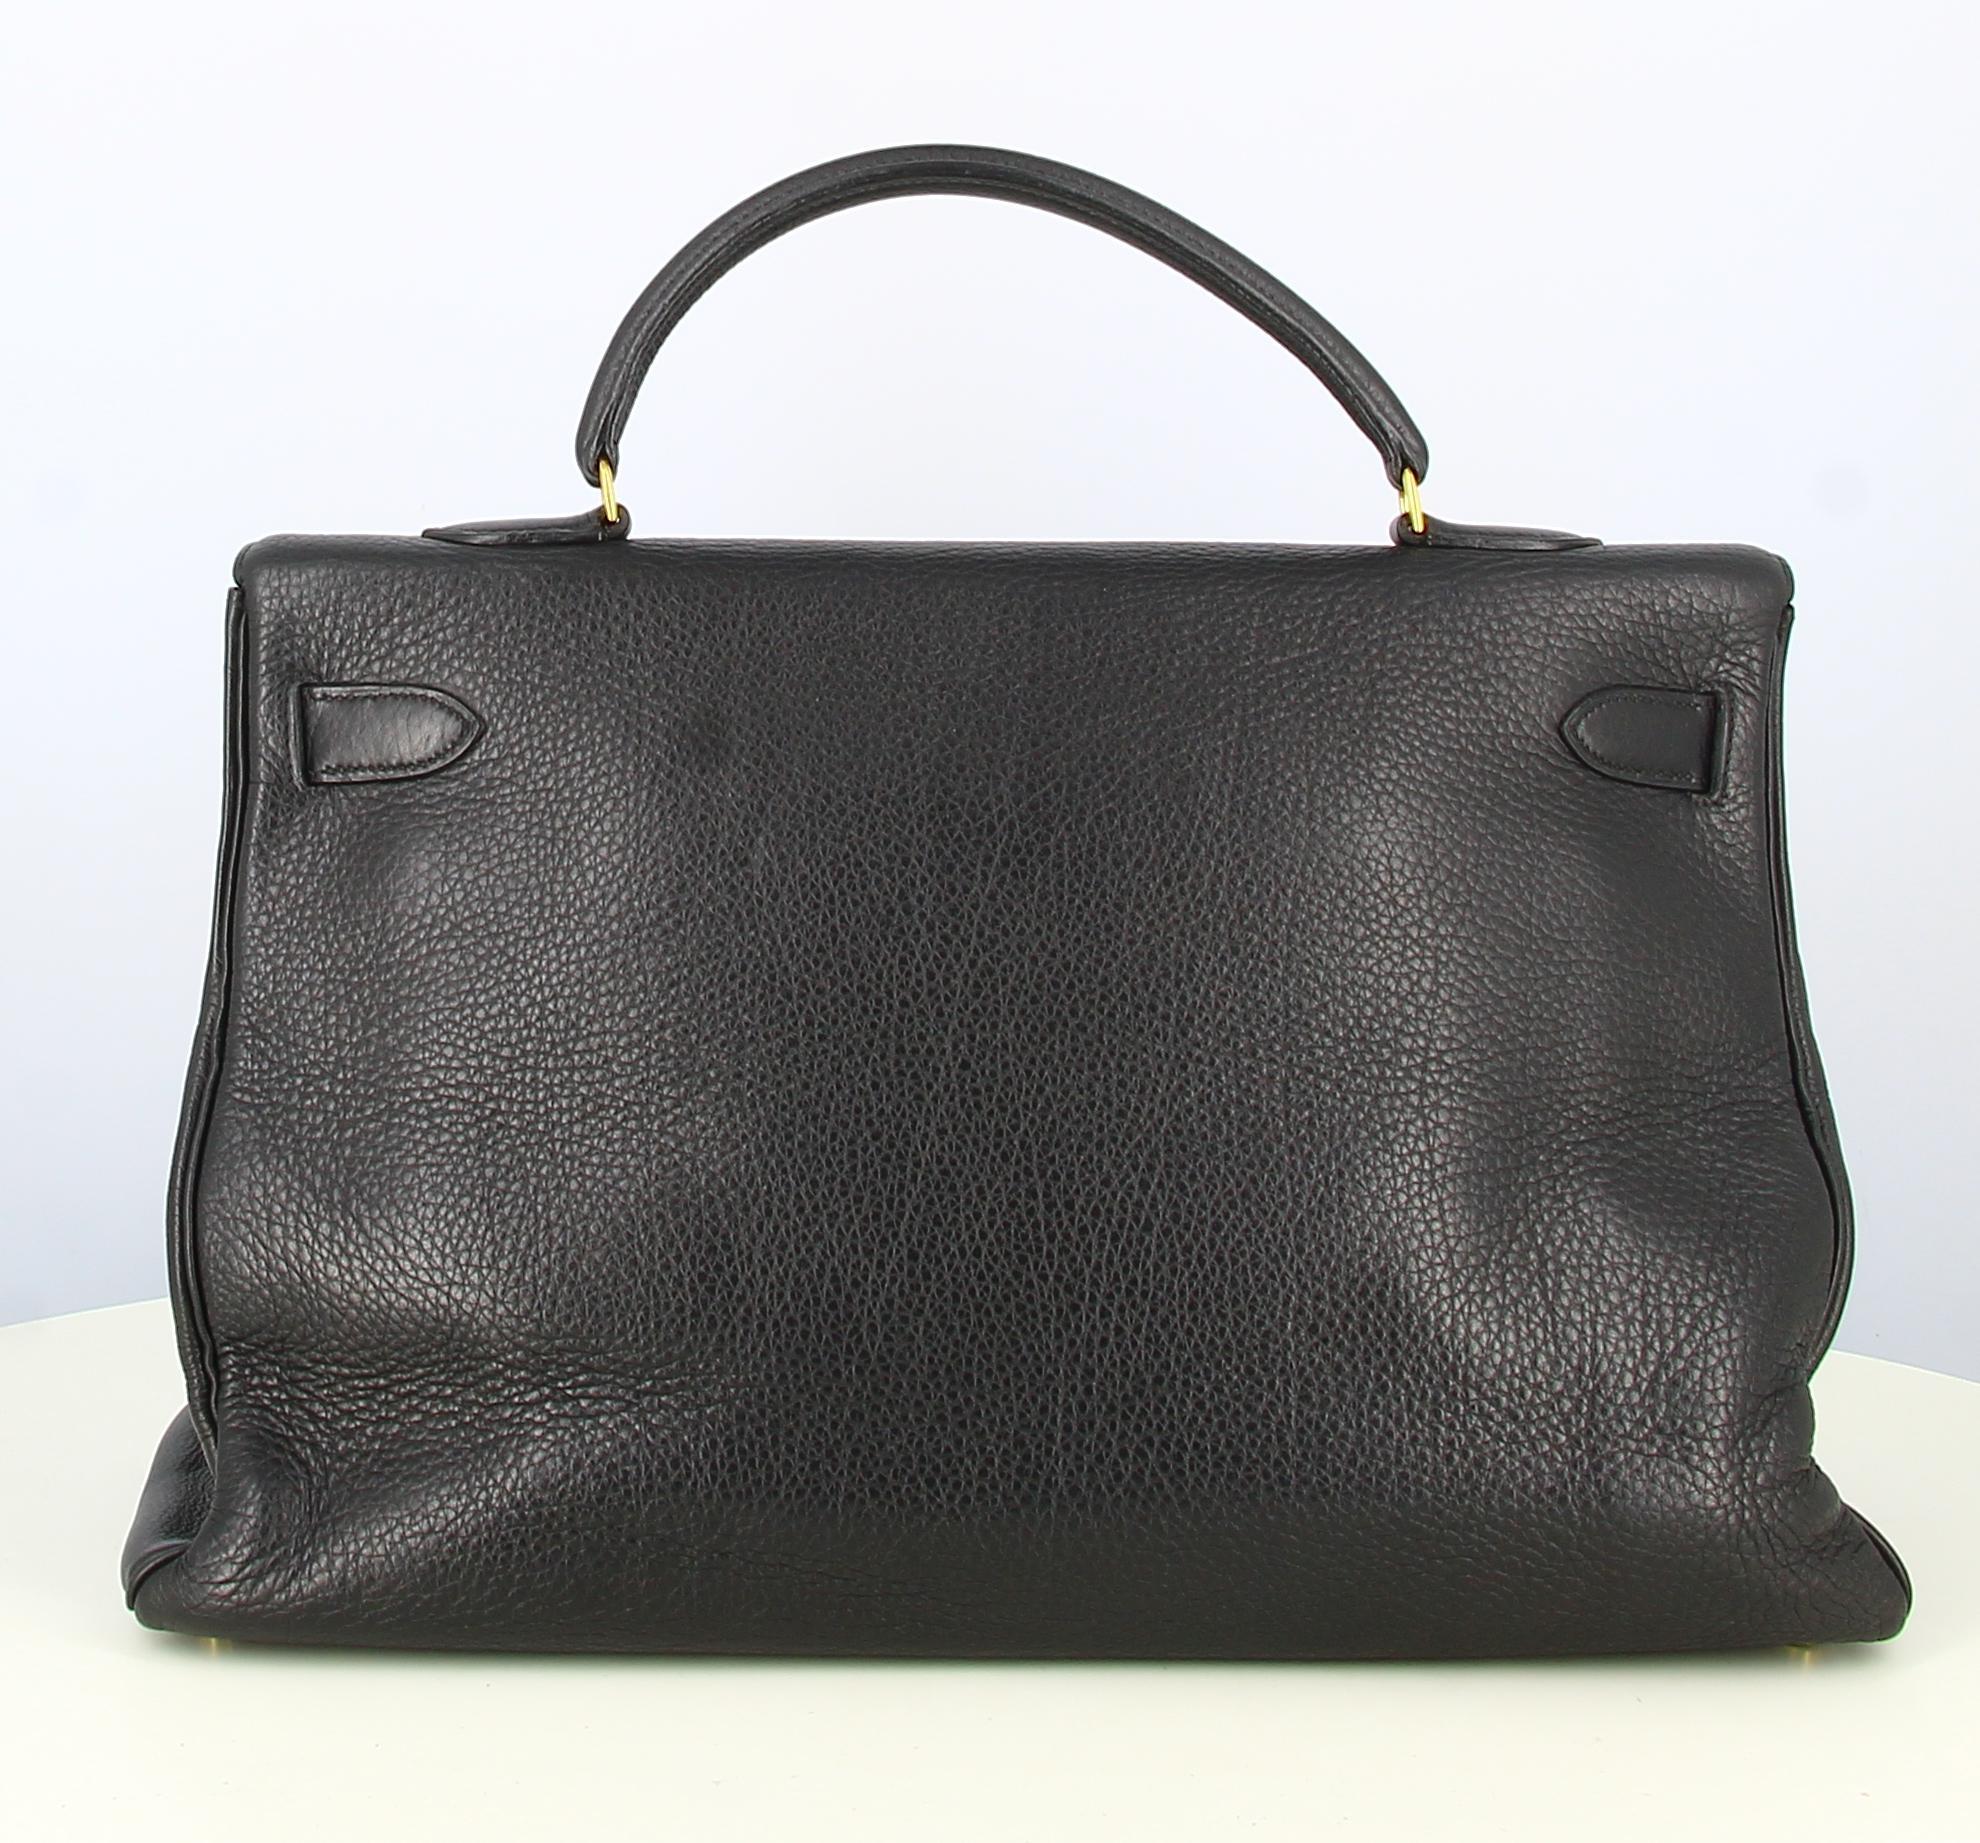 1997 Hermès Kelly 40 Leather Handbag Black
- Very good condition. Slight traces of age wear.
- Hermès Kelly bag
- Clasp: Gold-plated
- Interior: Black leather. Large inside gold zipped pocket. plus two inside pockets.